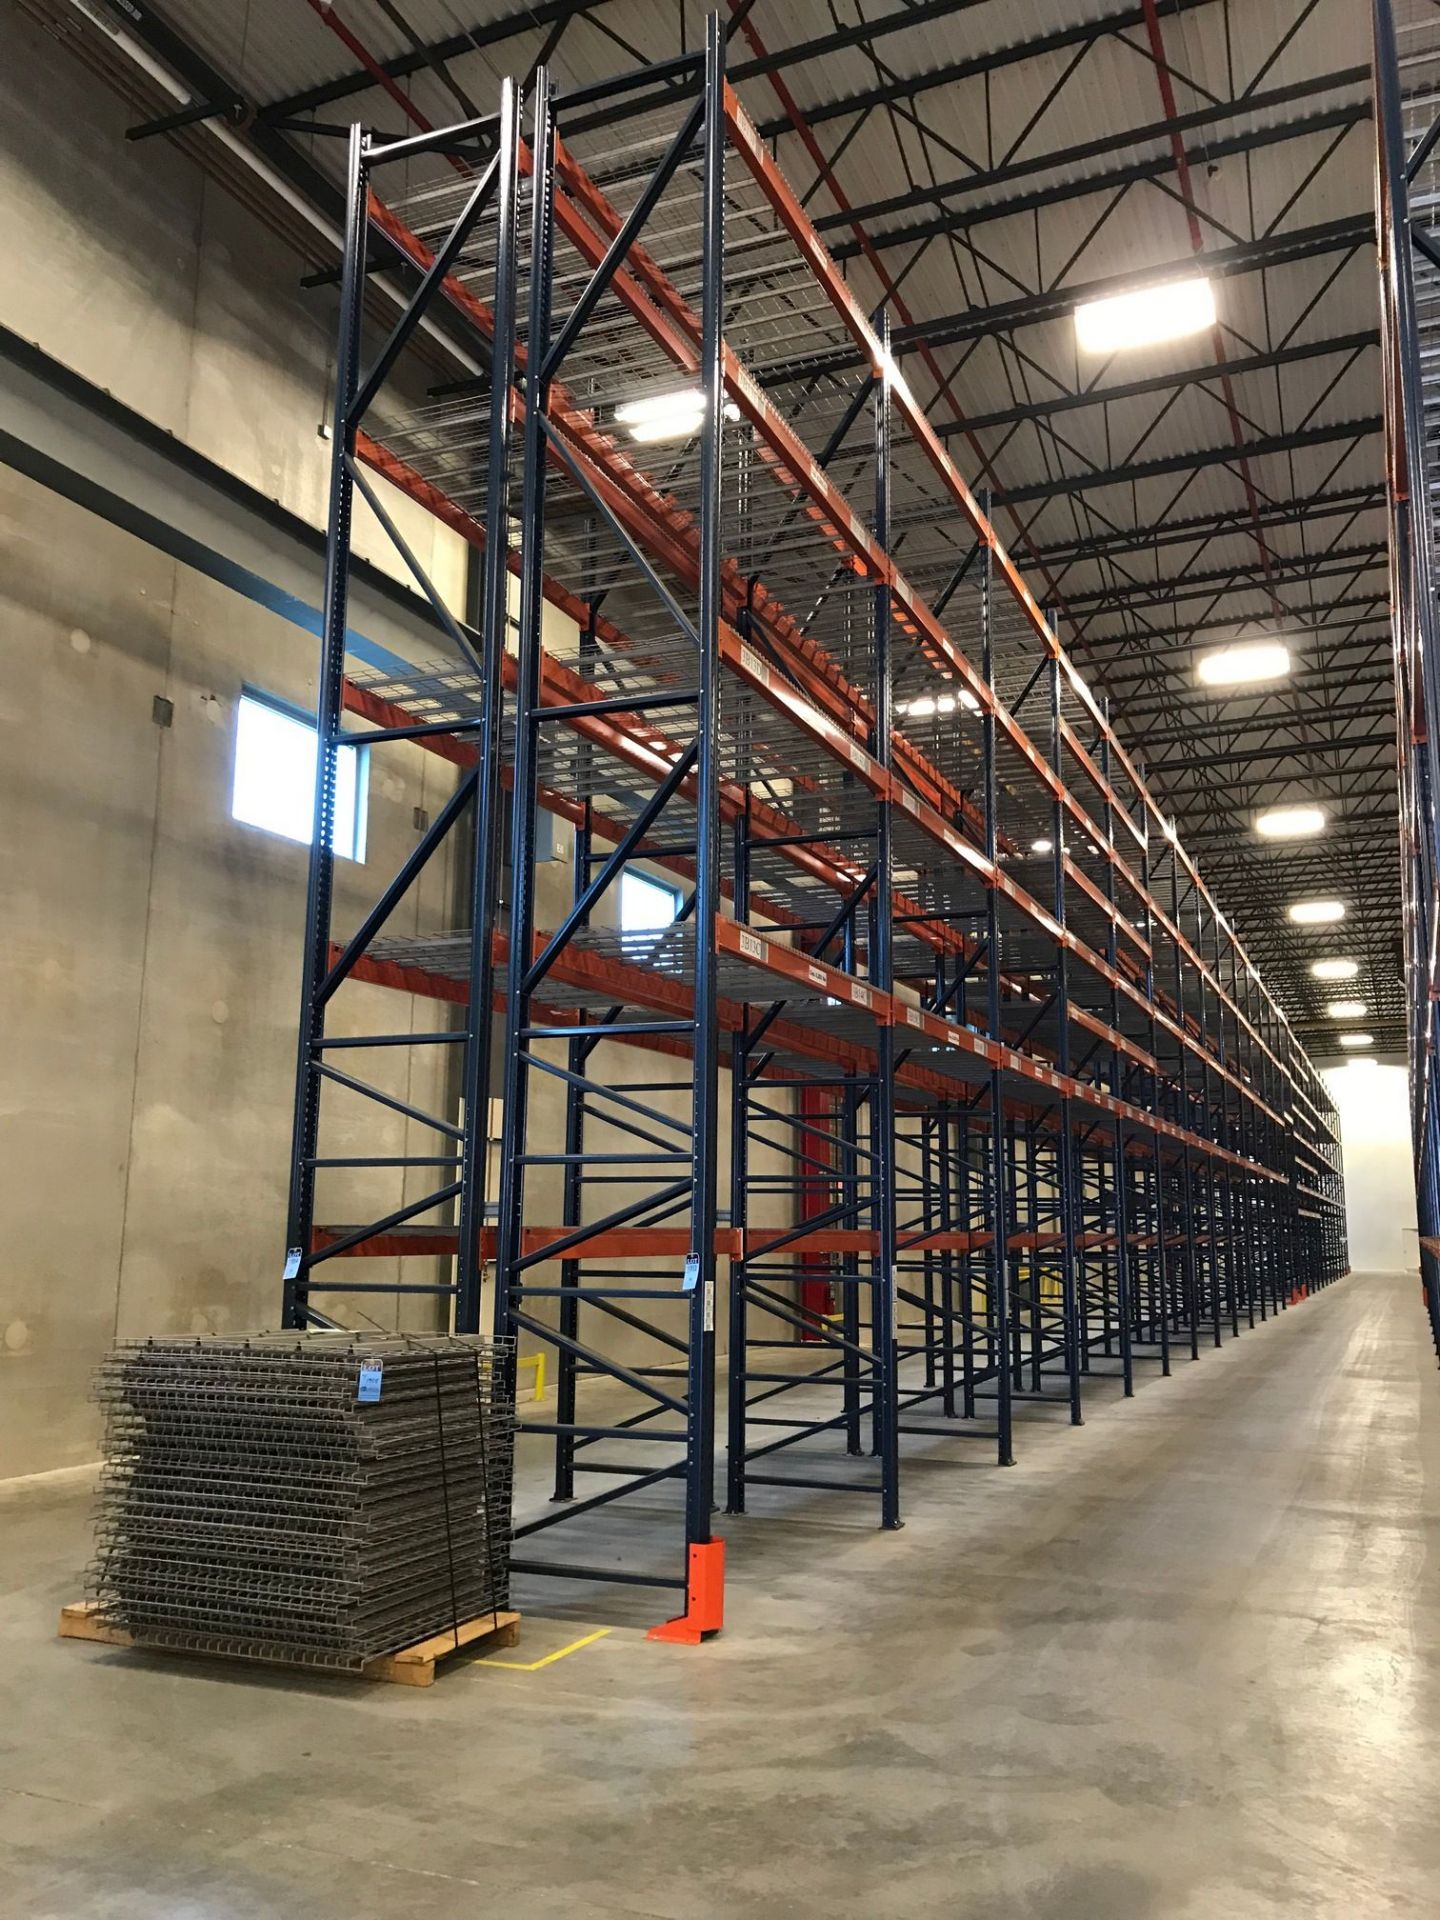 SECTIONS 108" LONG X 42" WIDE X 288" HIGH TEARDROP TYPE ADJUSTABLE BEAM PALLET RACK WITH WIRE